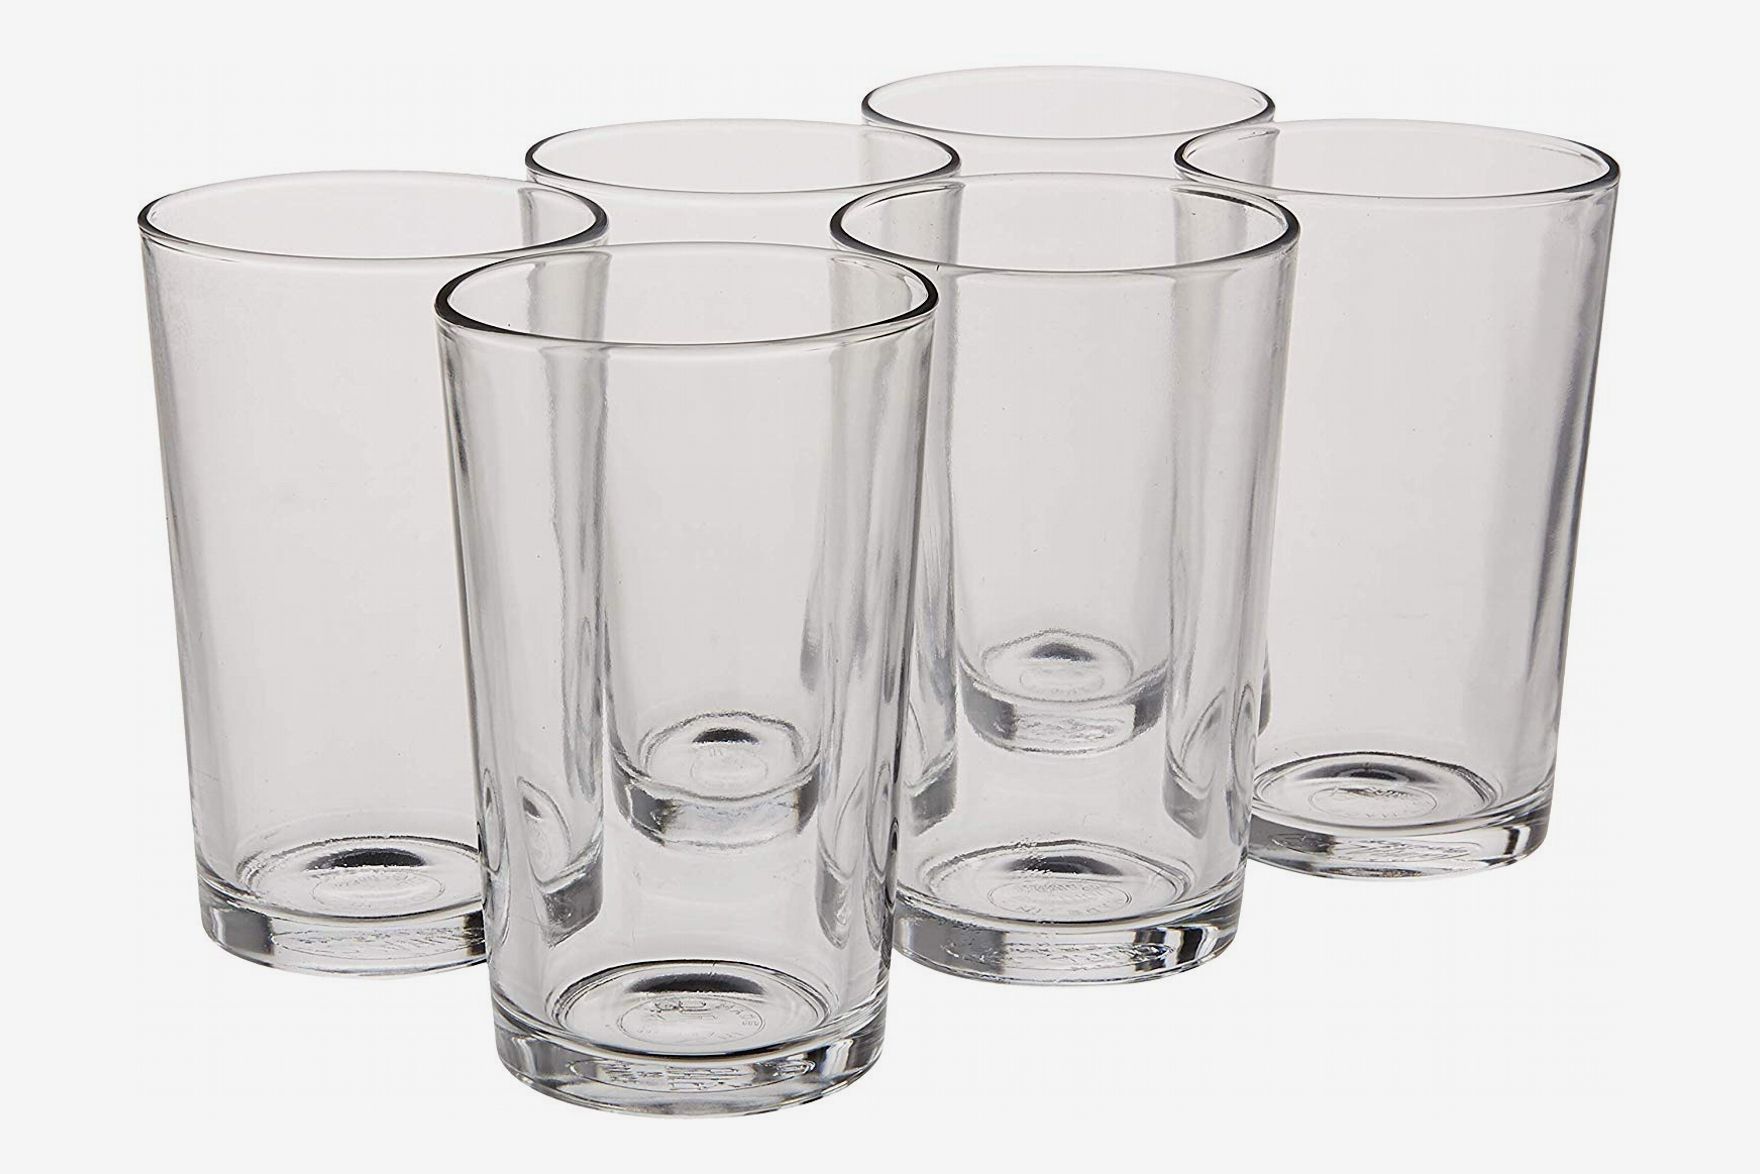 Classic 8-piece Premium Quality Plastic Tumblers 4 Each 12-ounce 16-ounce Clear